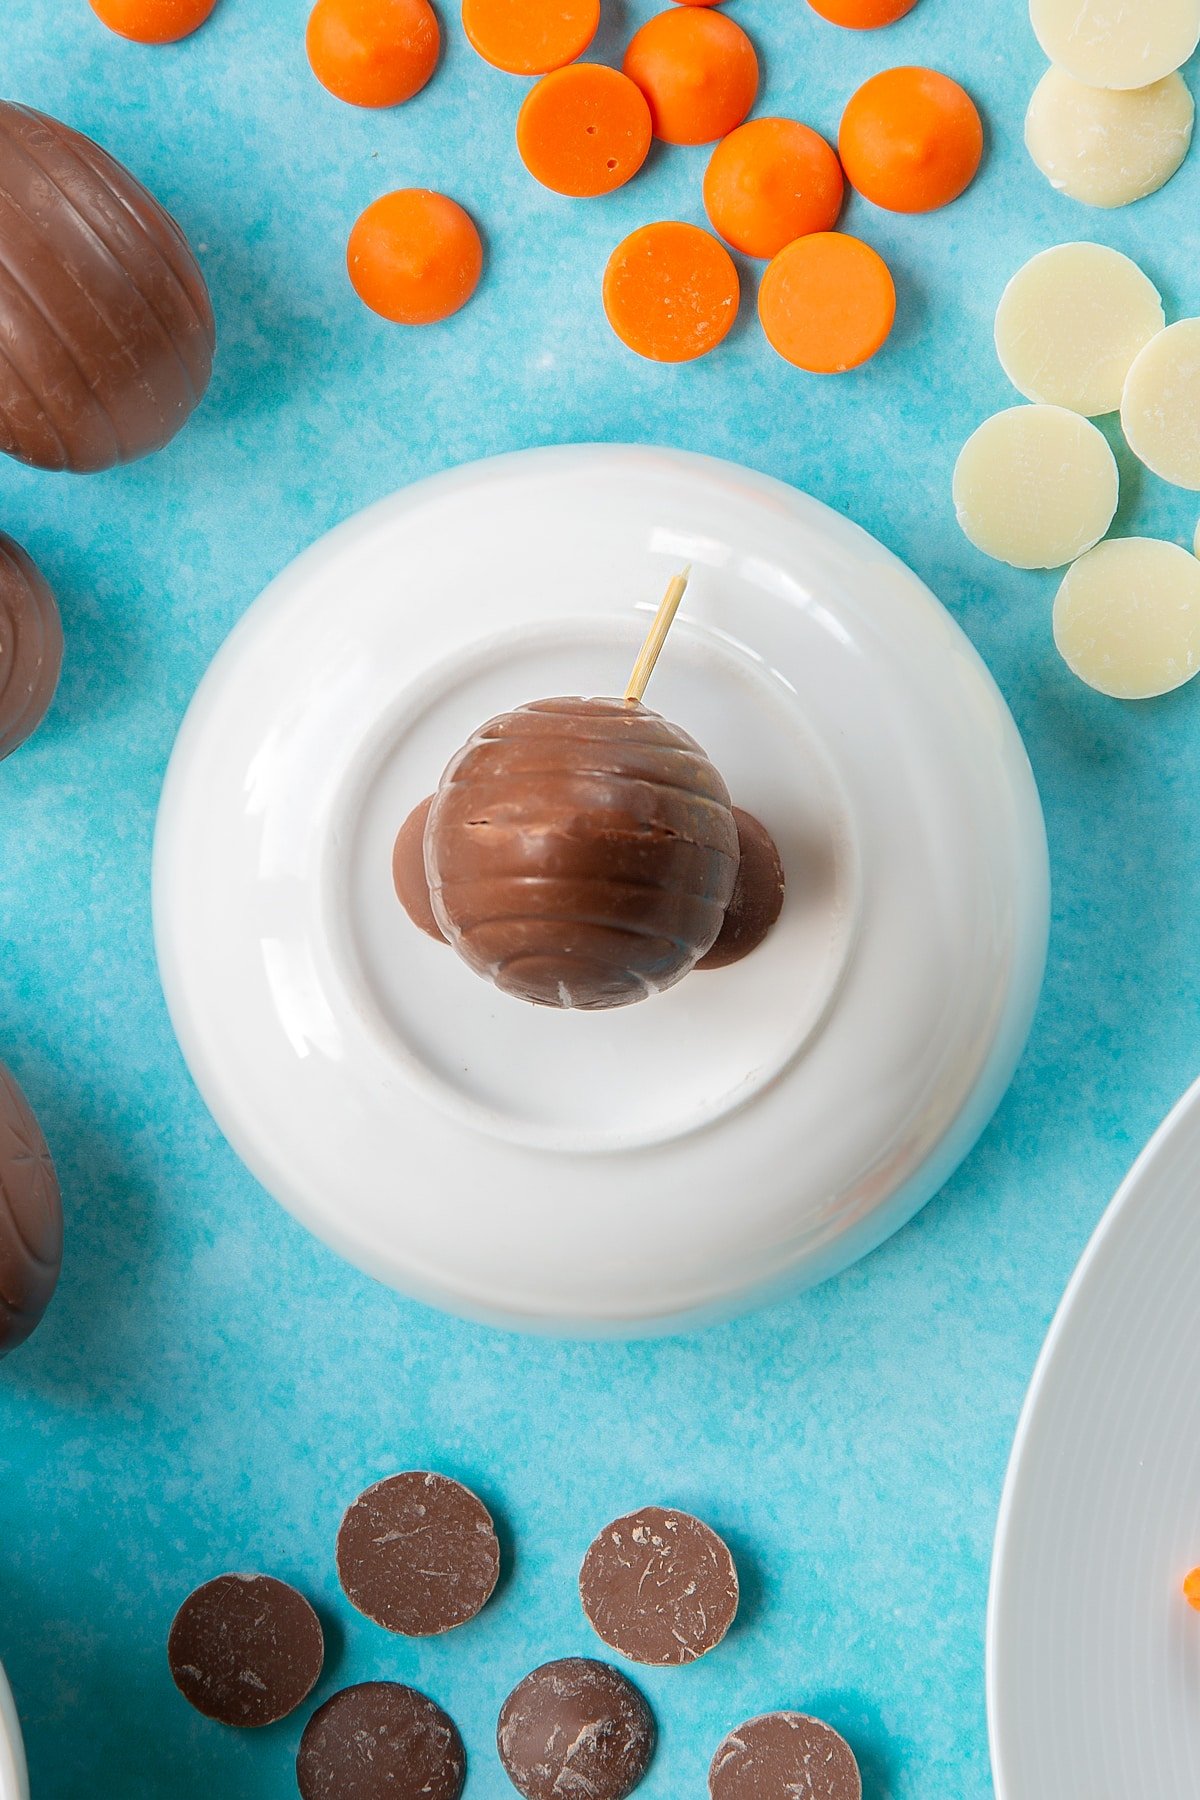 Two chocolate buttons topped with a creme egg sit on an upturned white bowl, surrounded by ingredients to make chocolate chicks.